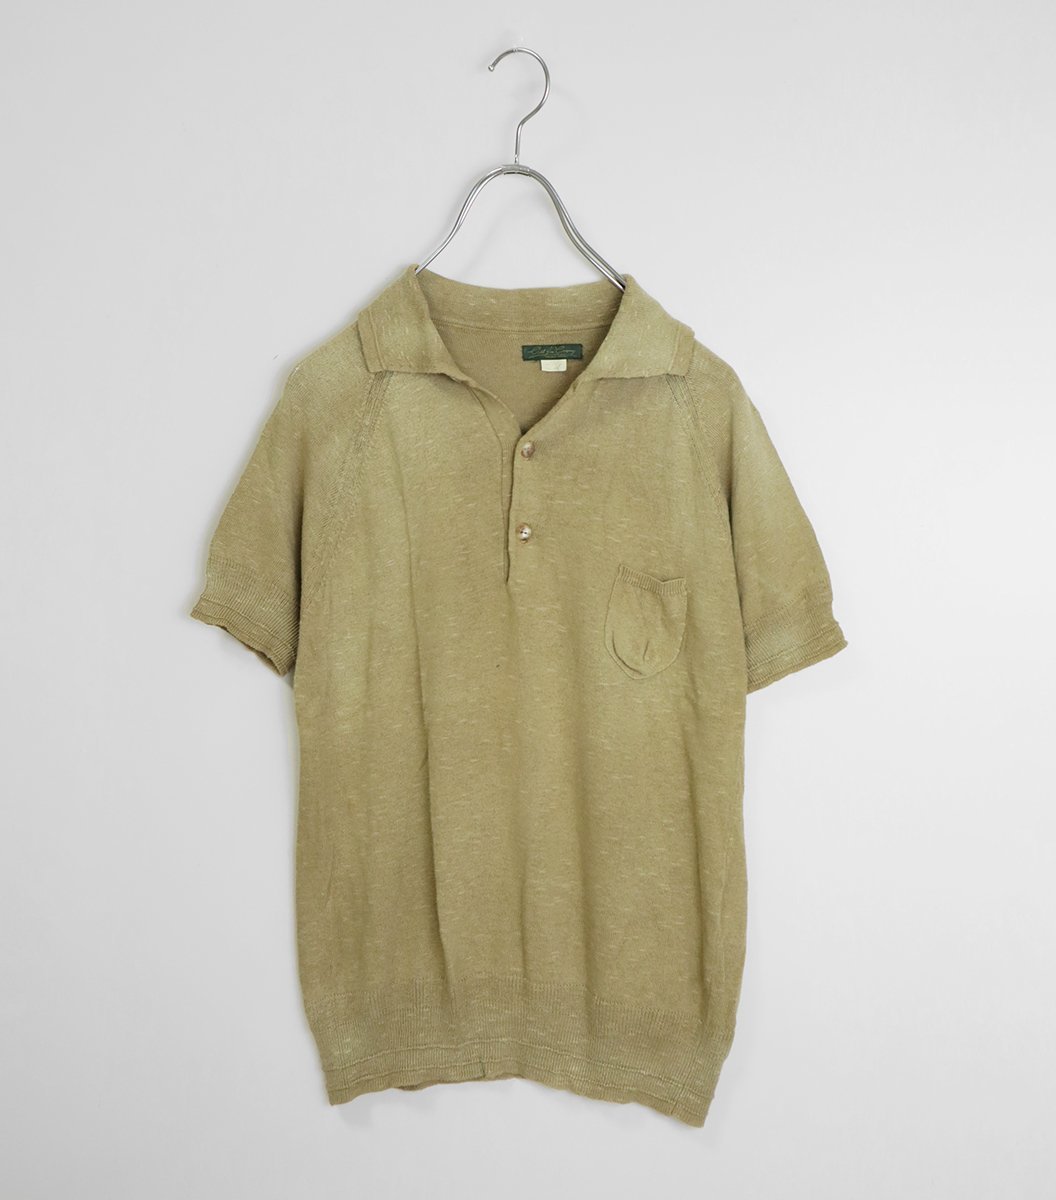 OLD JOE & CO Old Joe * cotton &linen knitted Polo size 36 polo-shirt with short sleeves *K2F